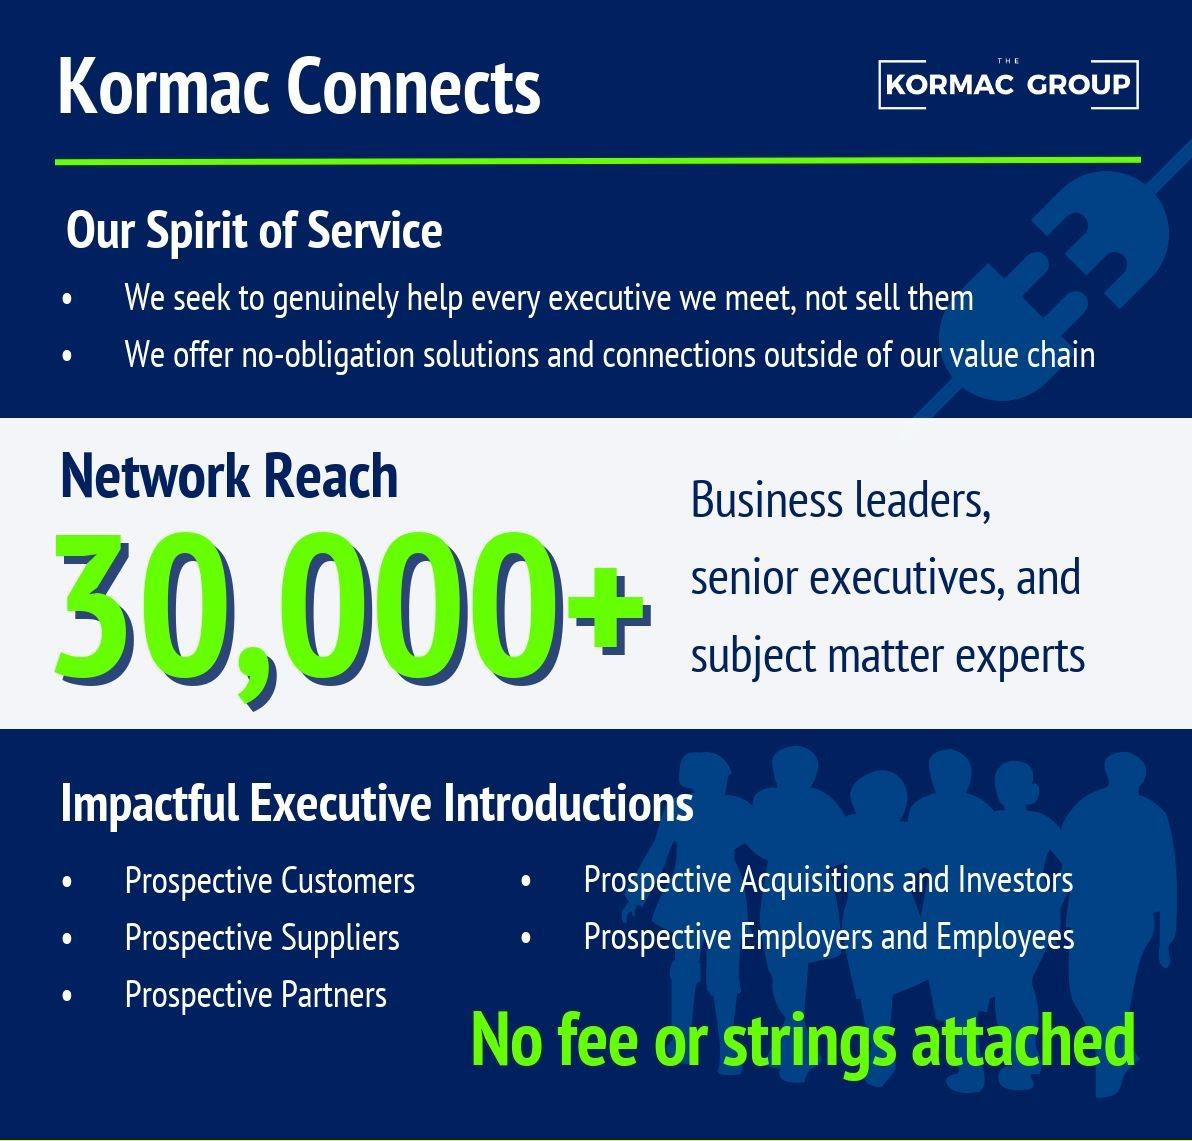 Kormac Connects Our Spirit of Service - We seek to genuinely help every executive we meet, not sell them - We offer no-obligation solutions and connections outside of our value chain Network Reach 30,000+ Business leaders, senior executives, and subject matter experts Impactful Executive Introductions - Prospective Customers - Prospective Suppliers - Prospective Partners - Prospective Acquisitions and Investors - Prospective Employers and Employees No fee or strings attached